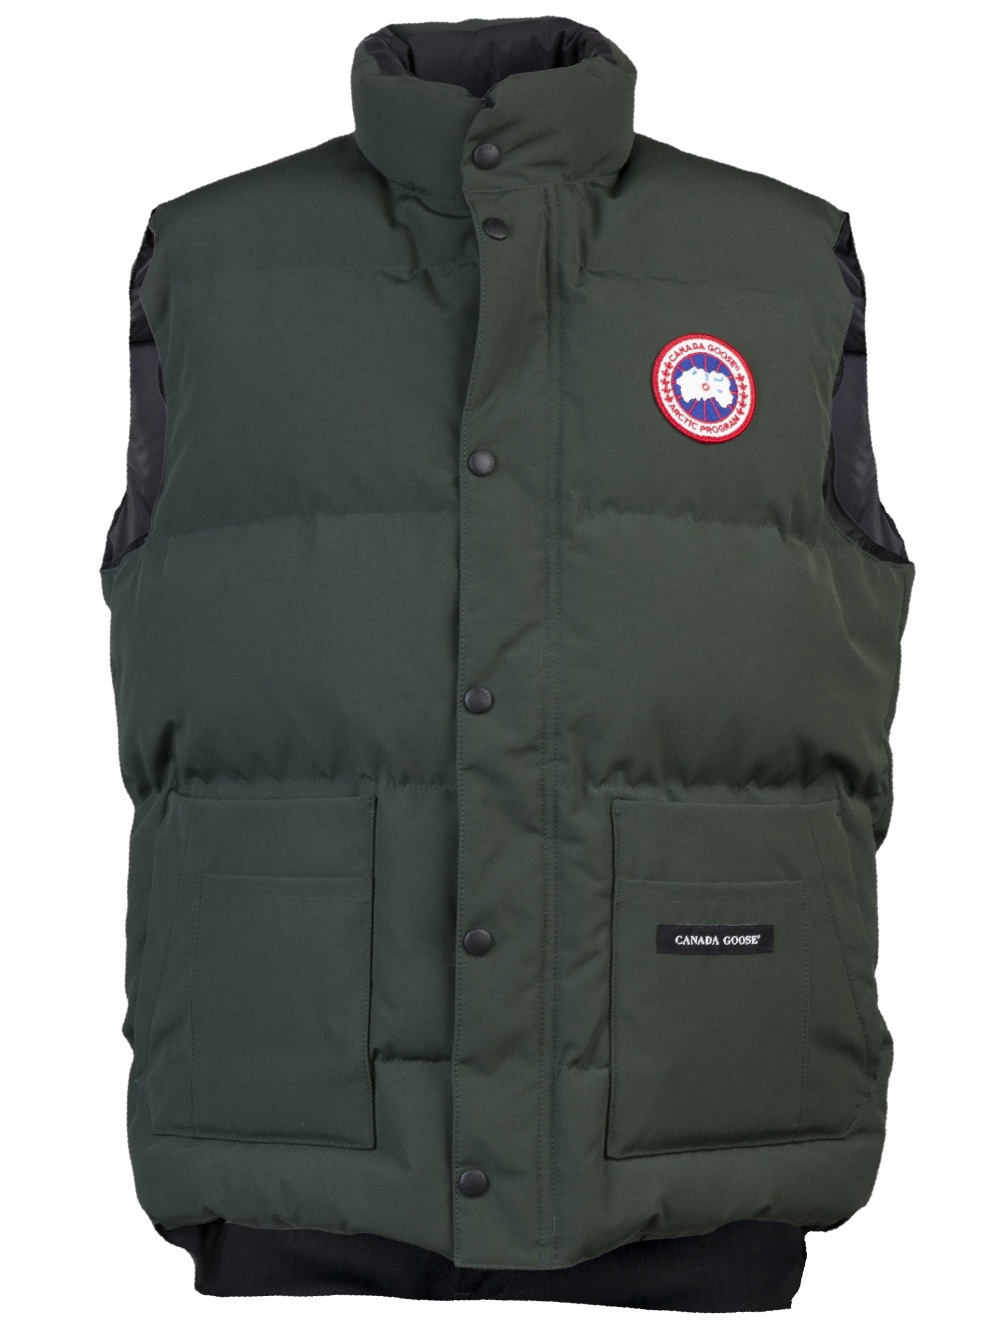 Canada Goose Freestyle Vest Jacket in Green for Men - Lyst